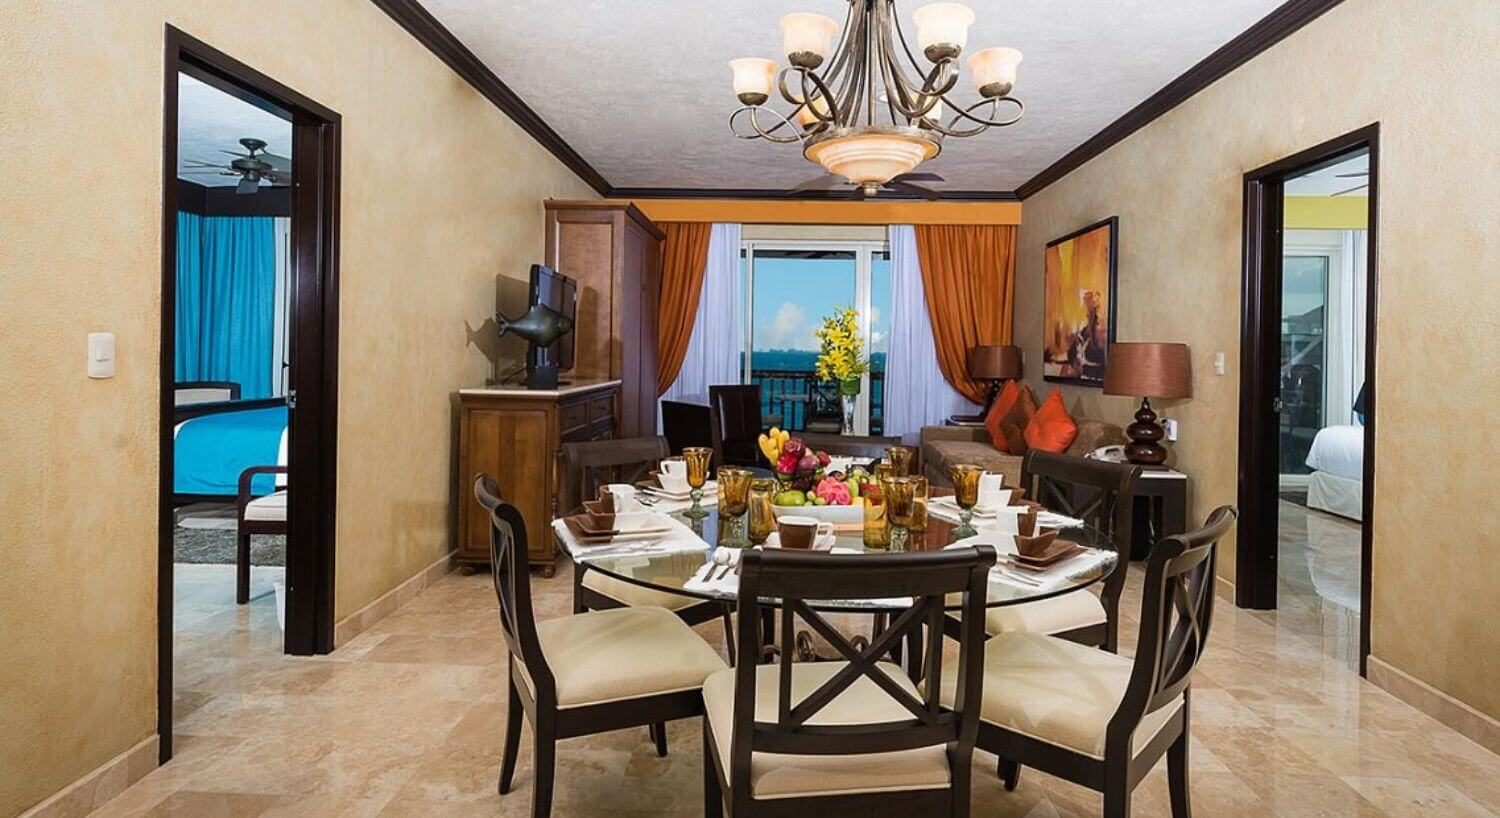 A spacious dining are with a circular glass table and several plush dining chairs, a living area with sliding doors out to a patio, and doors on either side of the dining room leading to two separate bedrooms.